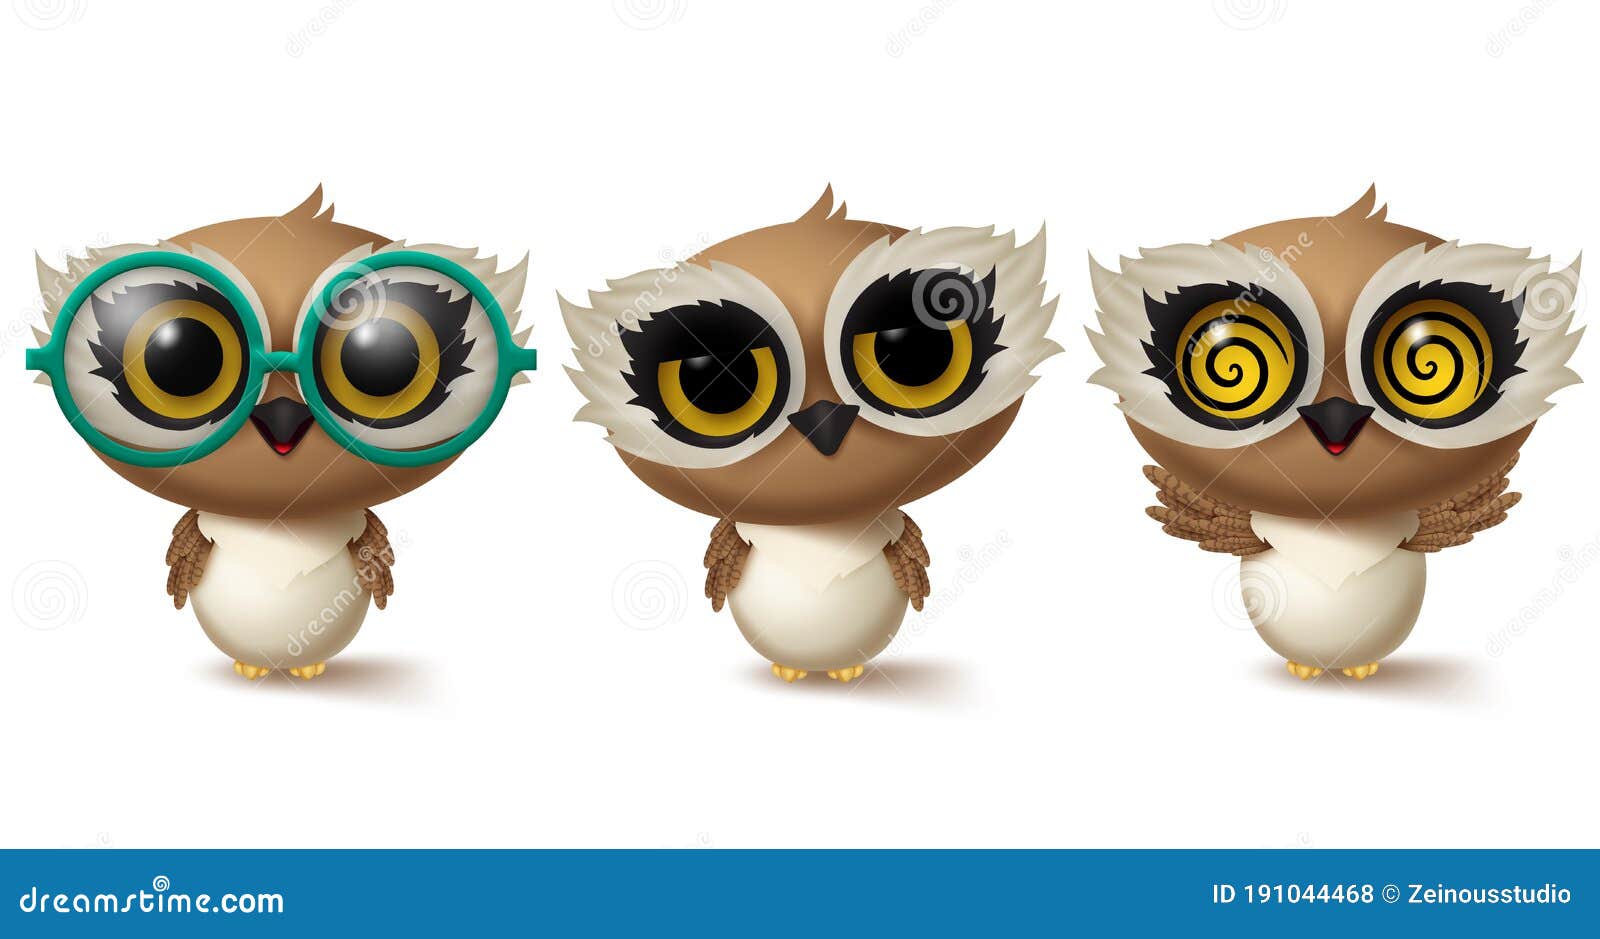 Owl Expressions Stock Illustrations – 117 Owl Expressions Stock  Illustrations, Vectors & Clipart - Dreamstime